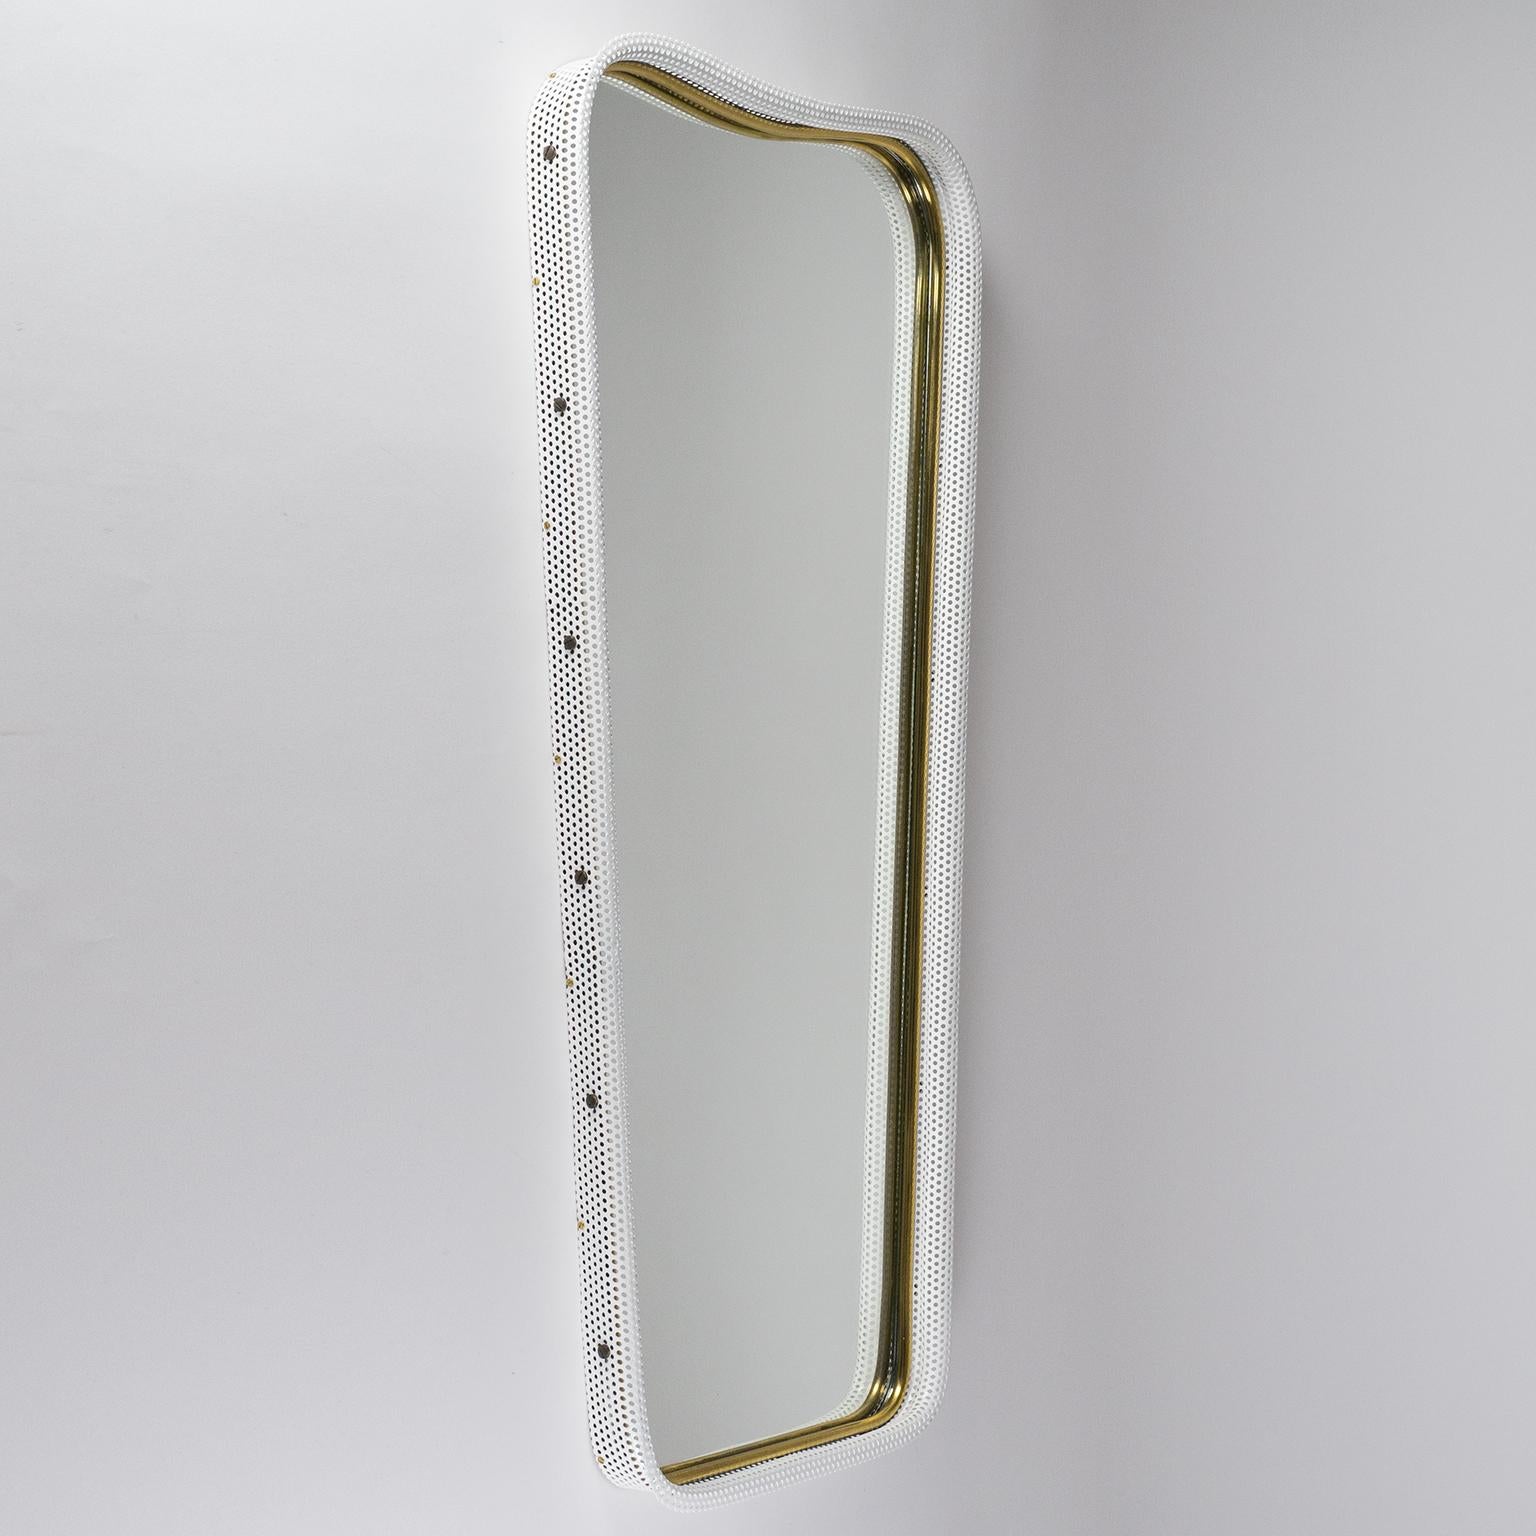 Very unique midcentury wall mirror with a beveled perforated metal frame in white and a tubular brass inner rim. Excellent craftsmanship with original mirror in very good shape.
Measures: Total height 31.5 inches/ 80cm, width at the top 15.8